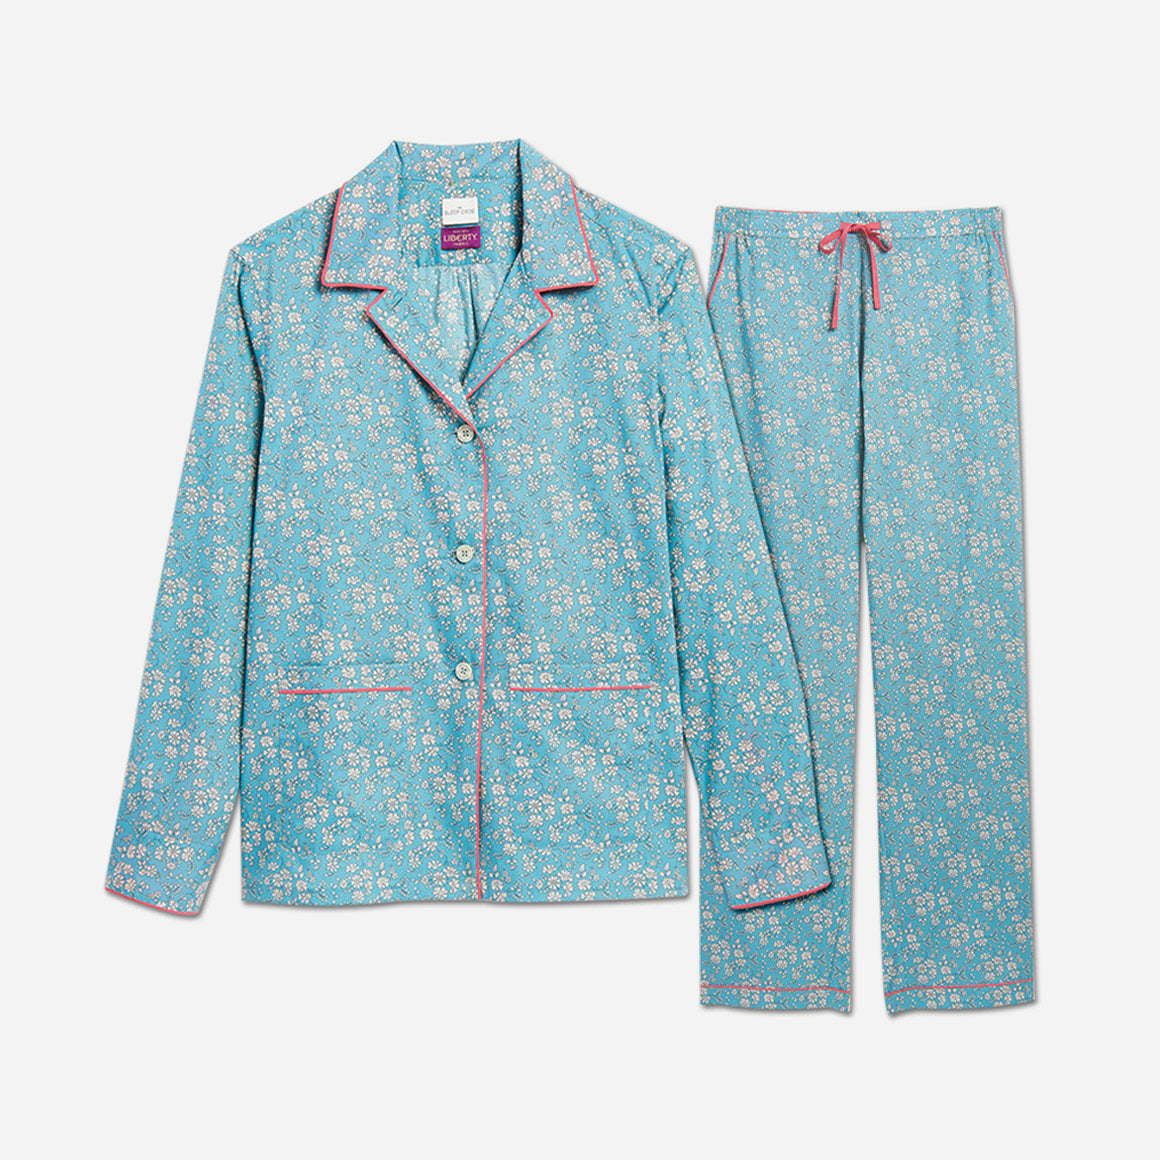 The pajama set includes a classic button-up top with a collar, two patch pockets, and functional button cuffs. The matching pair of pants features a comfortable elastic waistband, drawstring, and side-seam pockets. The long sleeves offer extra coverage and warmth for cooler evenings. 